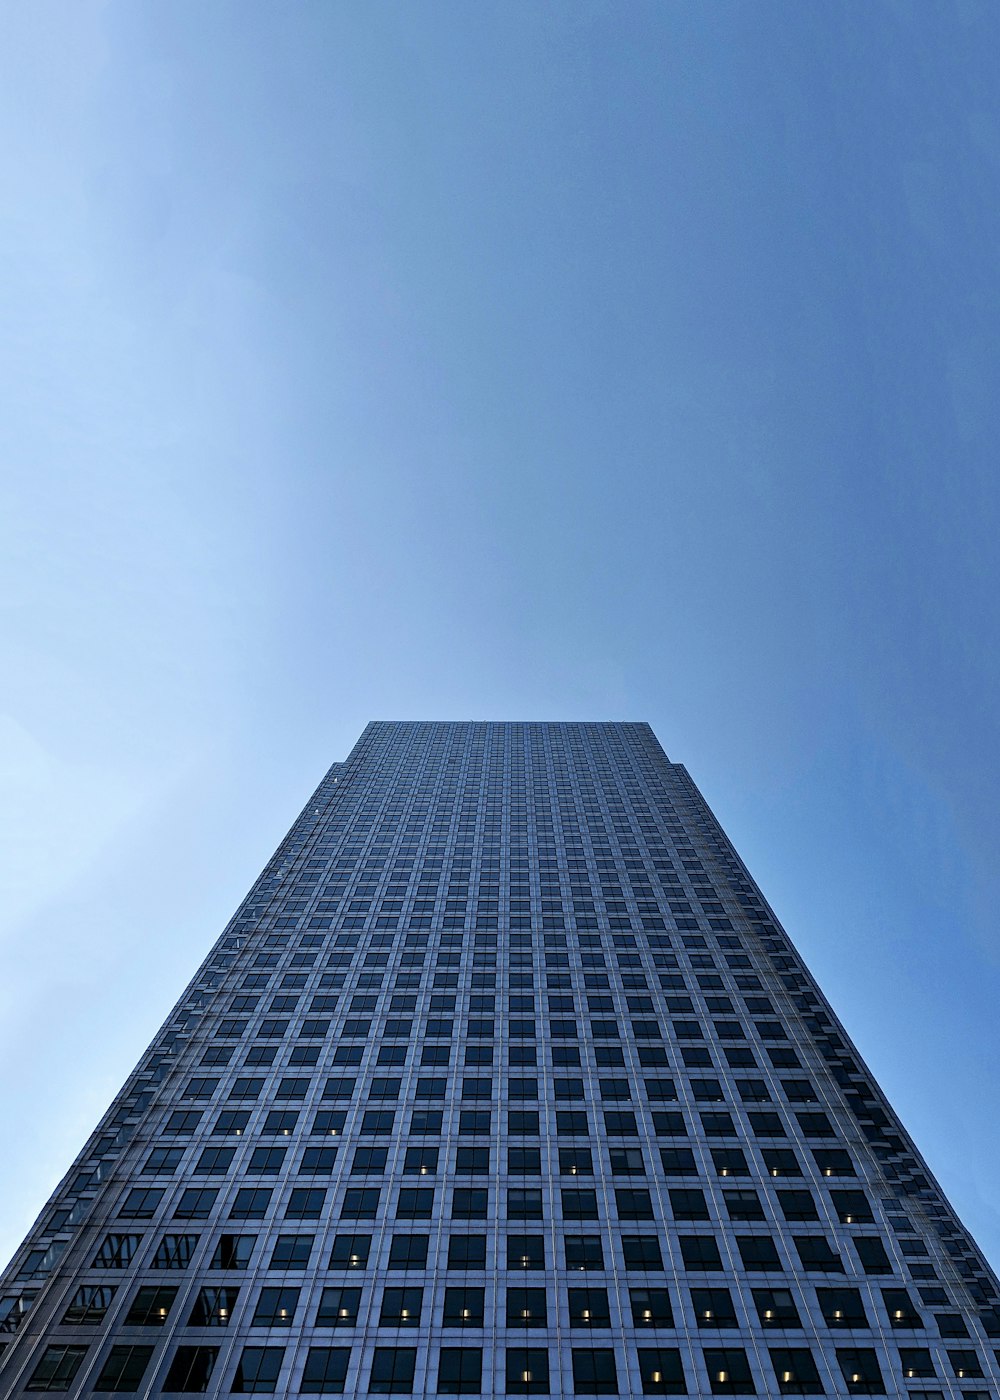 worm's eye view photo of building